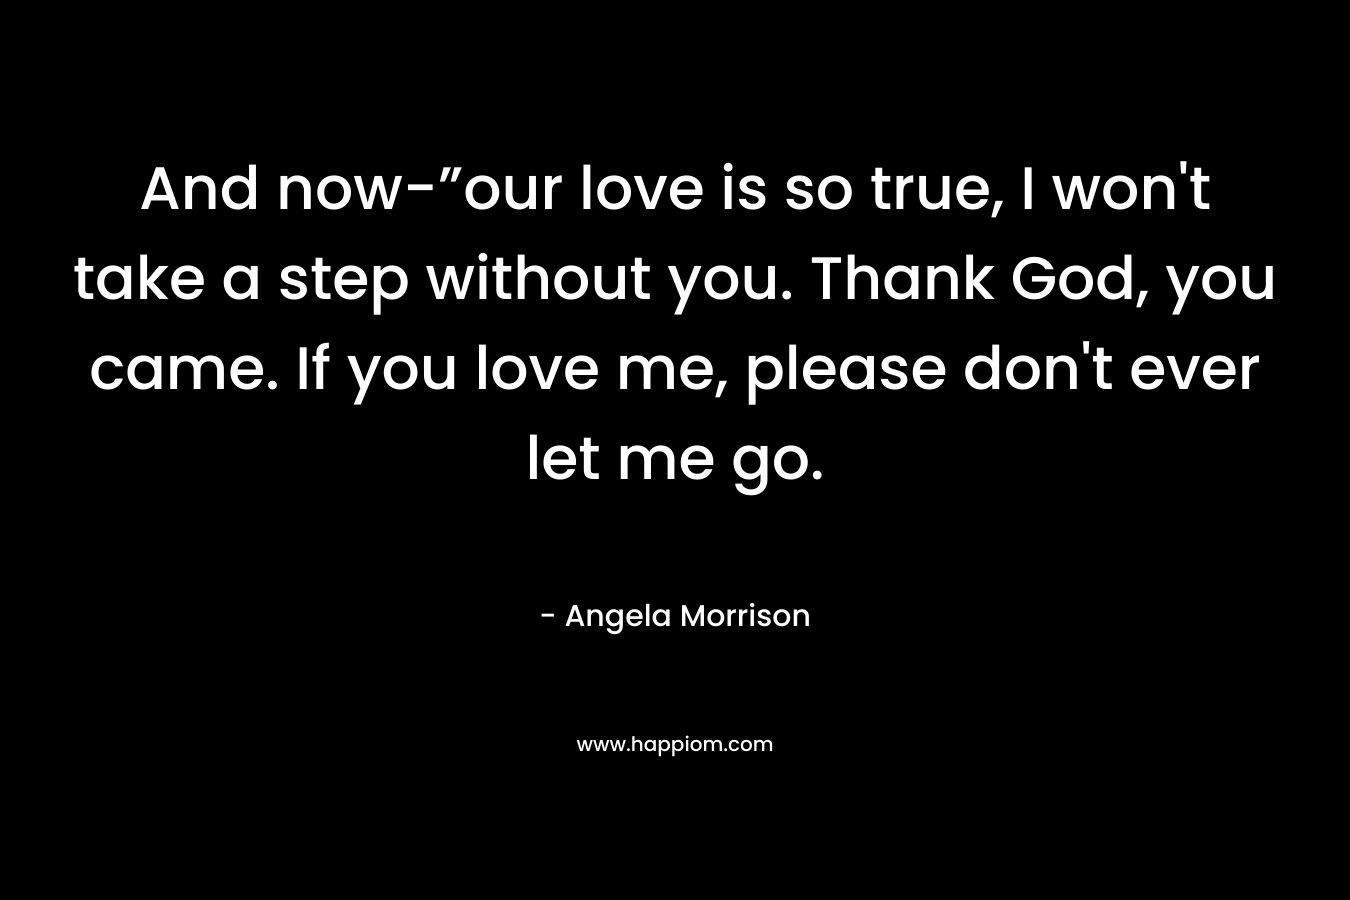 And now-”our love is so true, I won’t take a step without you. Thank God, you came. If you love me, please don’t ever let me go. – Angela Morrison